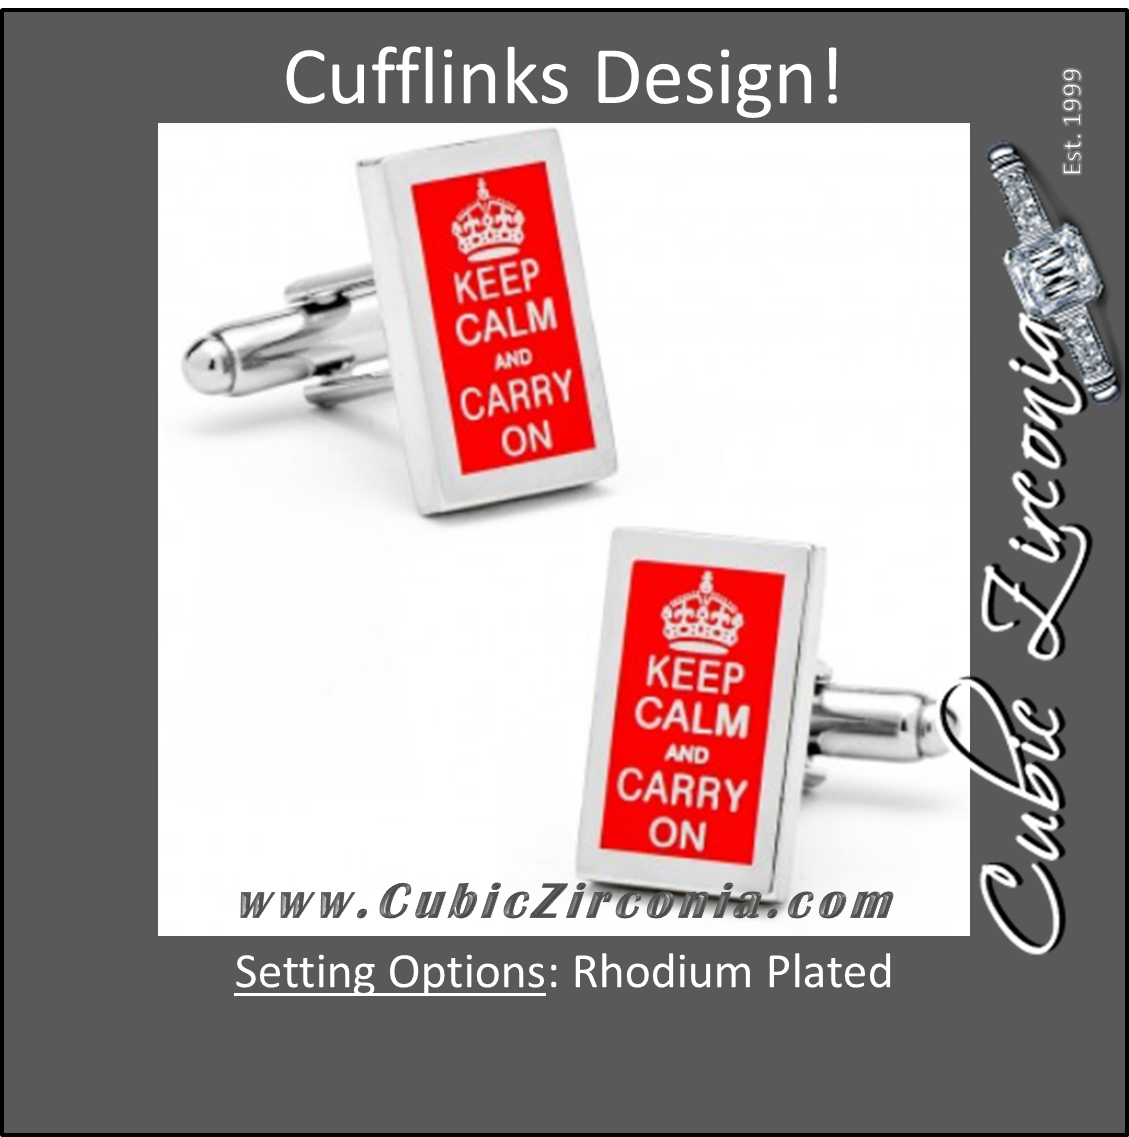 Men’s Cufflinks- "Keep Calm and Carry On" Rectangles